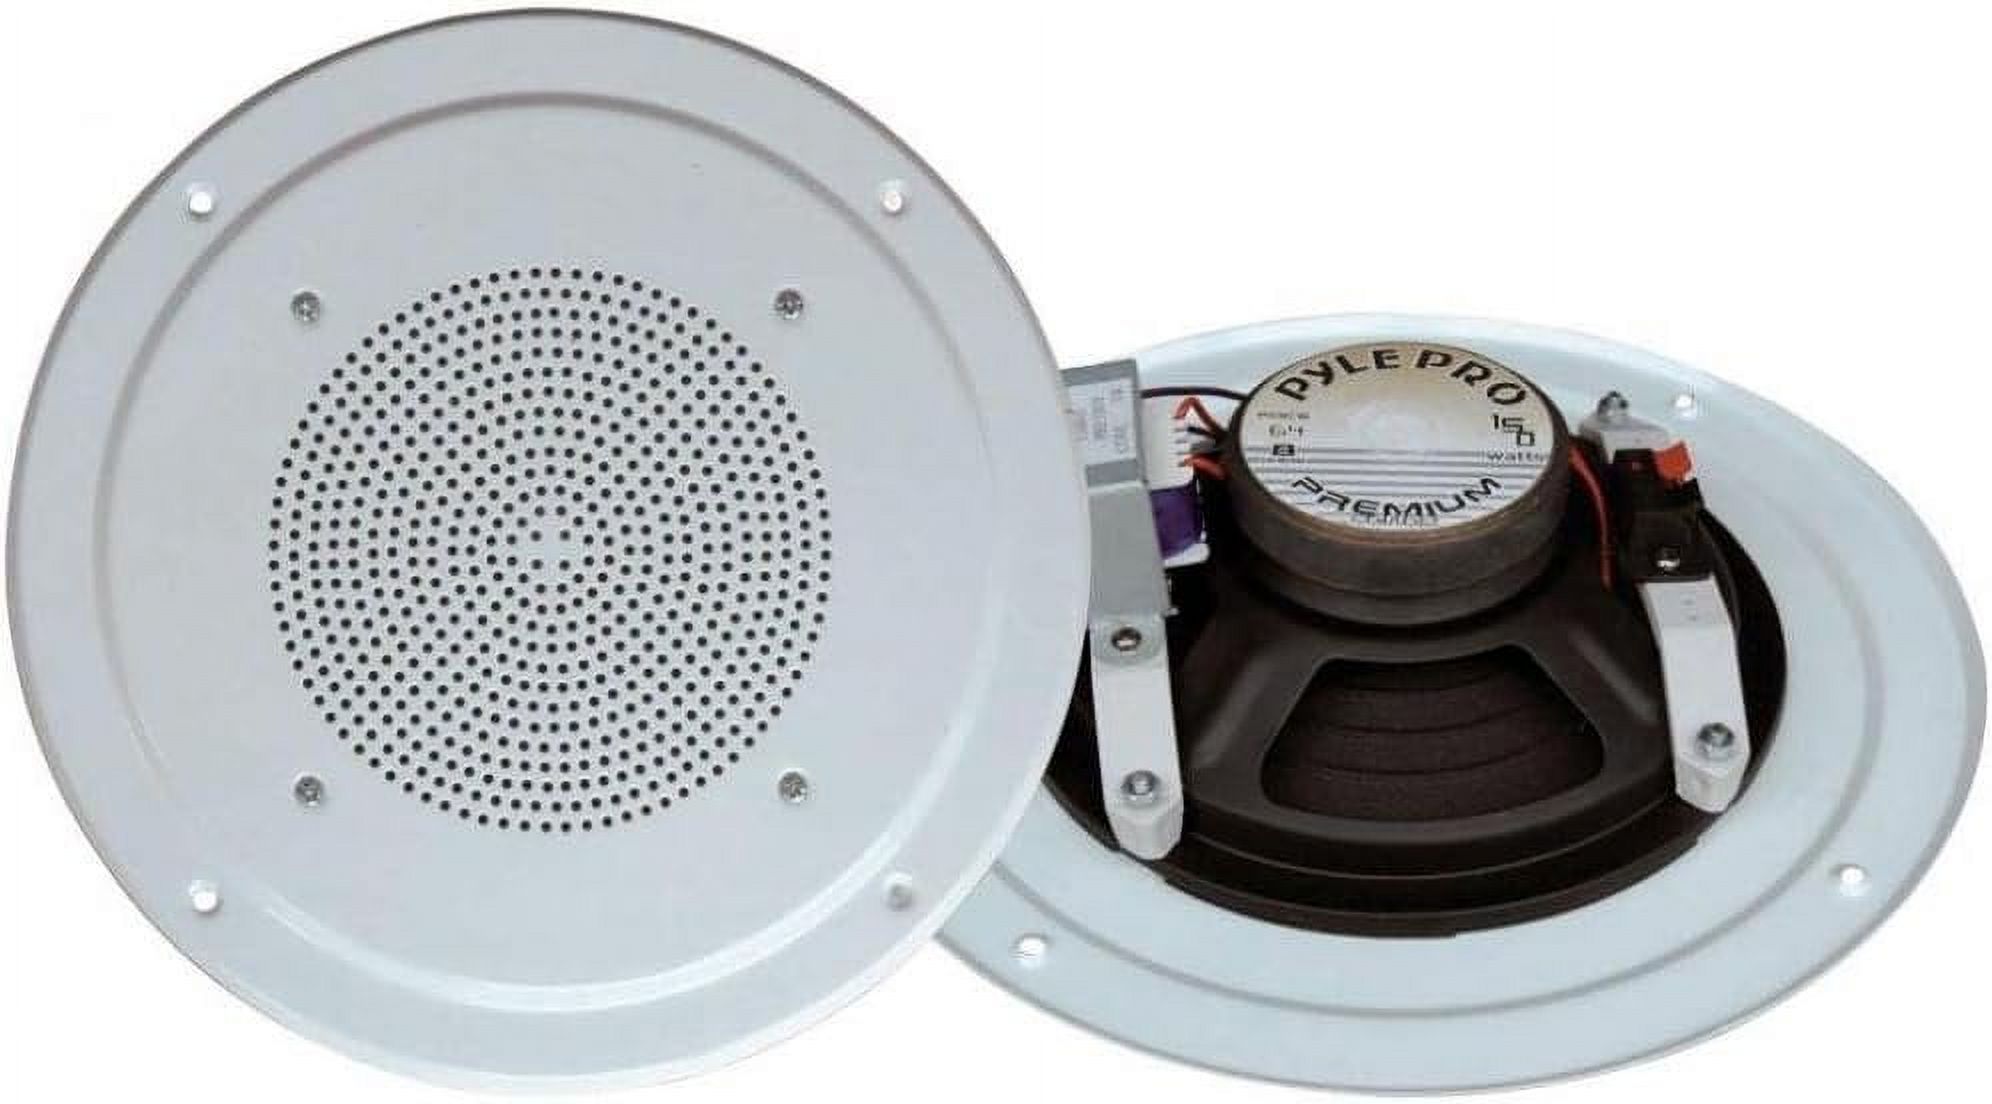 Pyle Ceiling Wall Mount Speaker - White - image 1 of 1